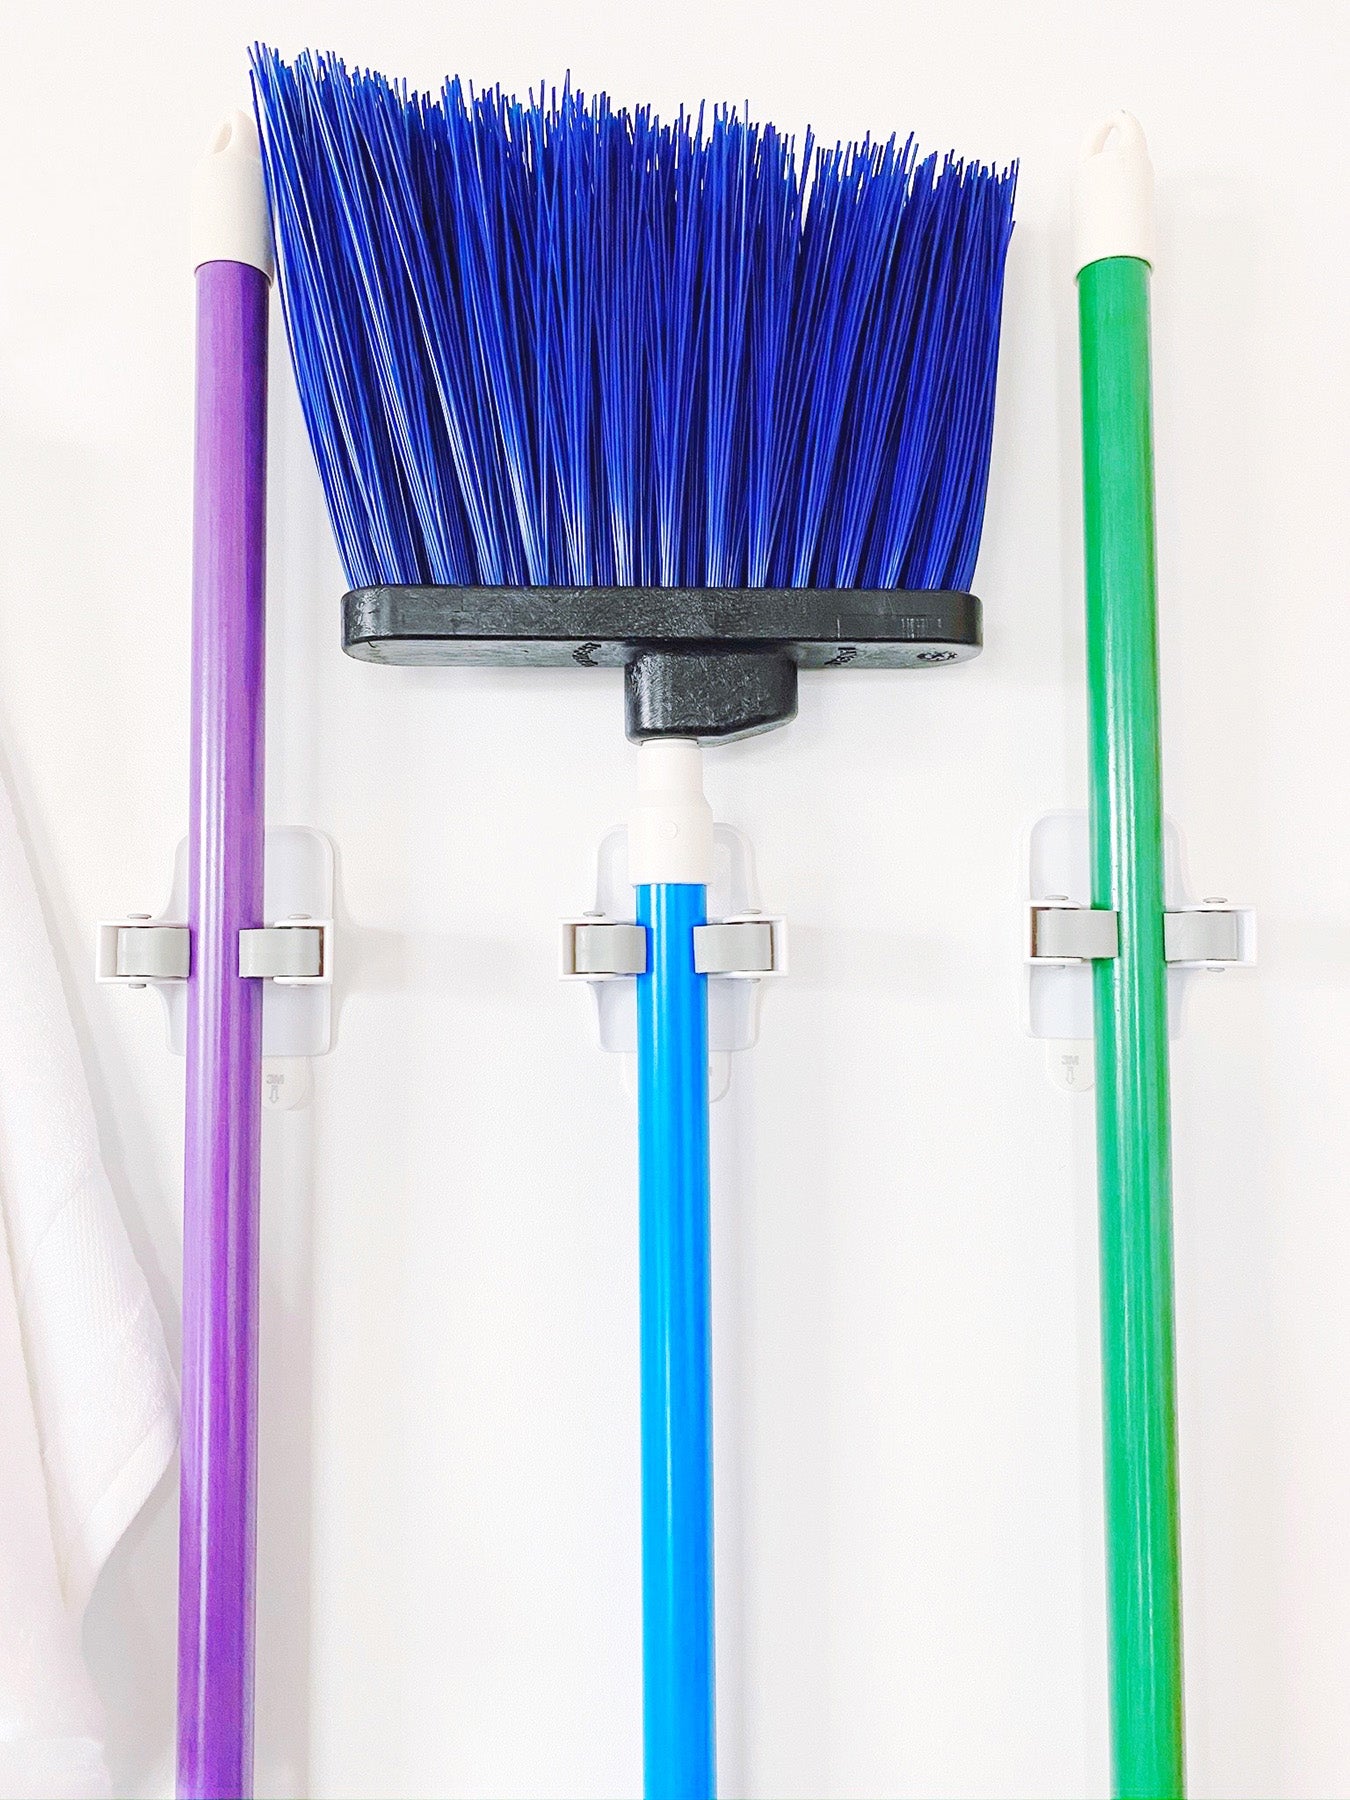 5 Broom Closet Organization Ideas to Simplify Your Cleaning Routine